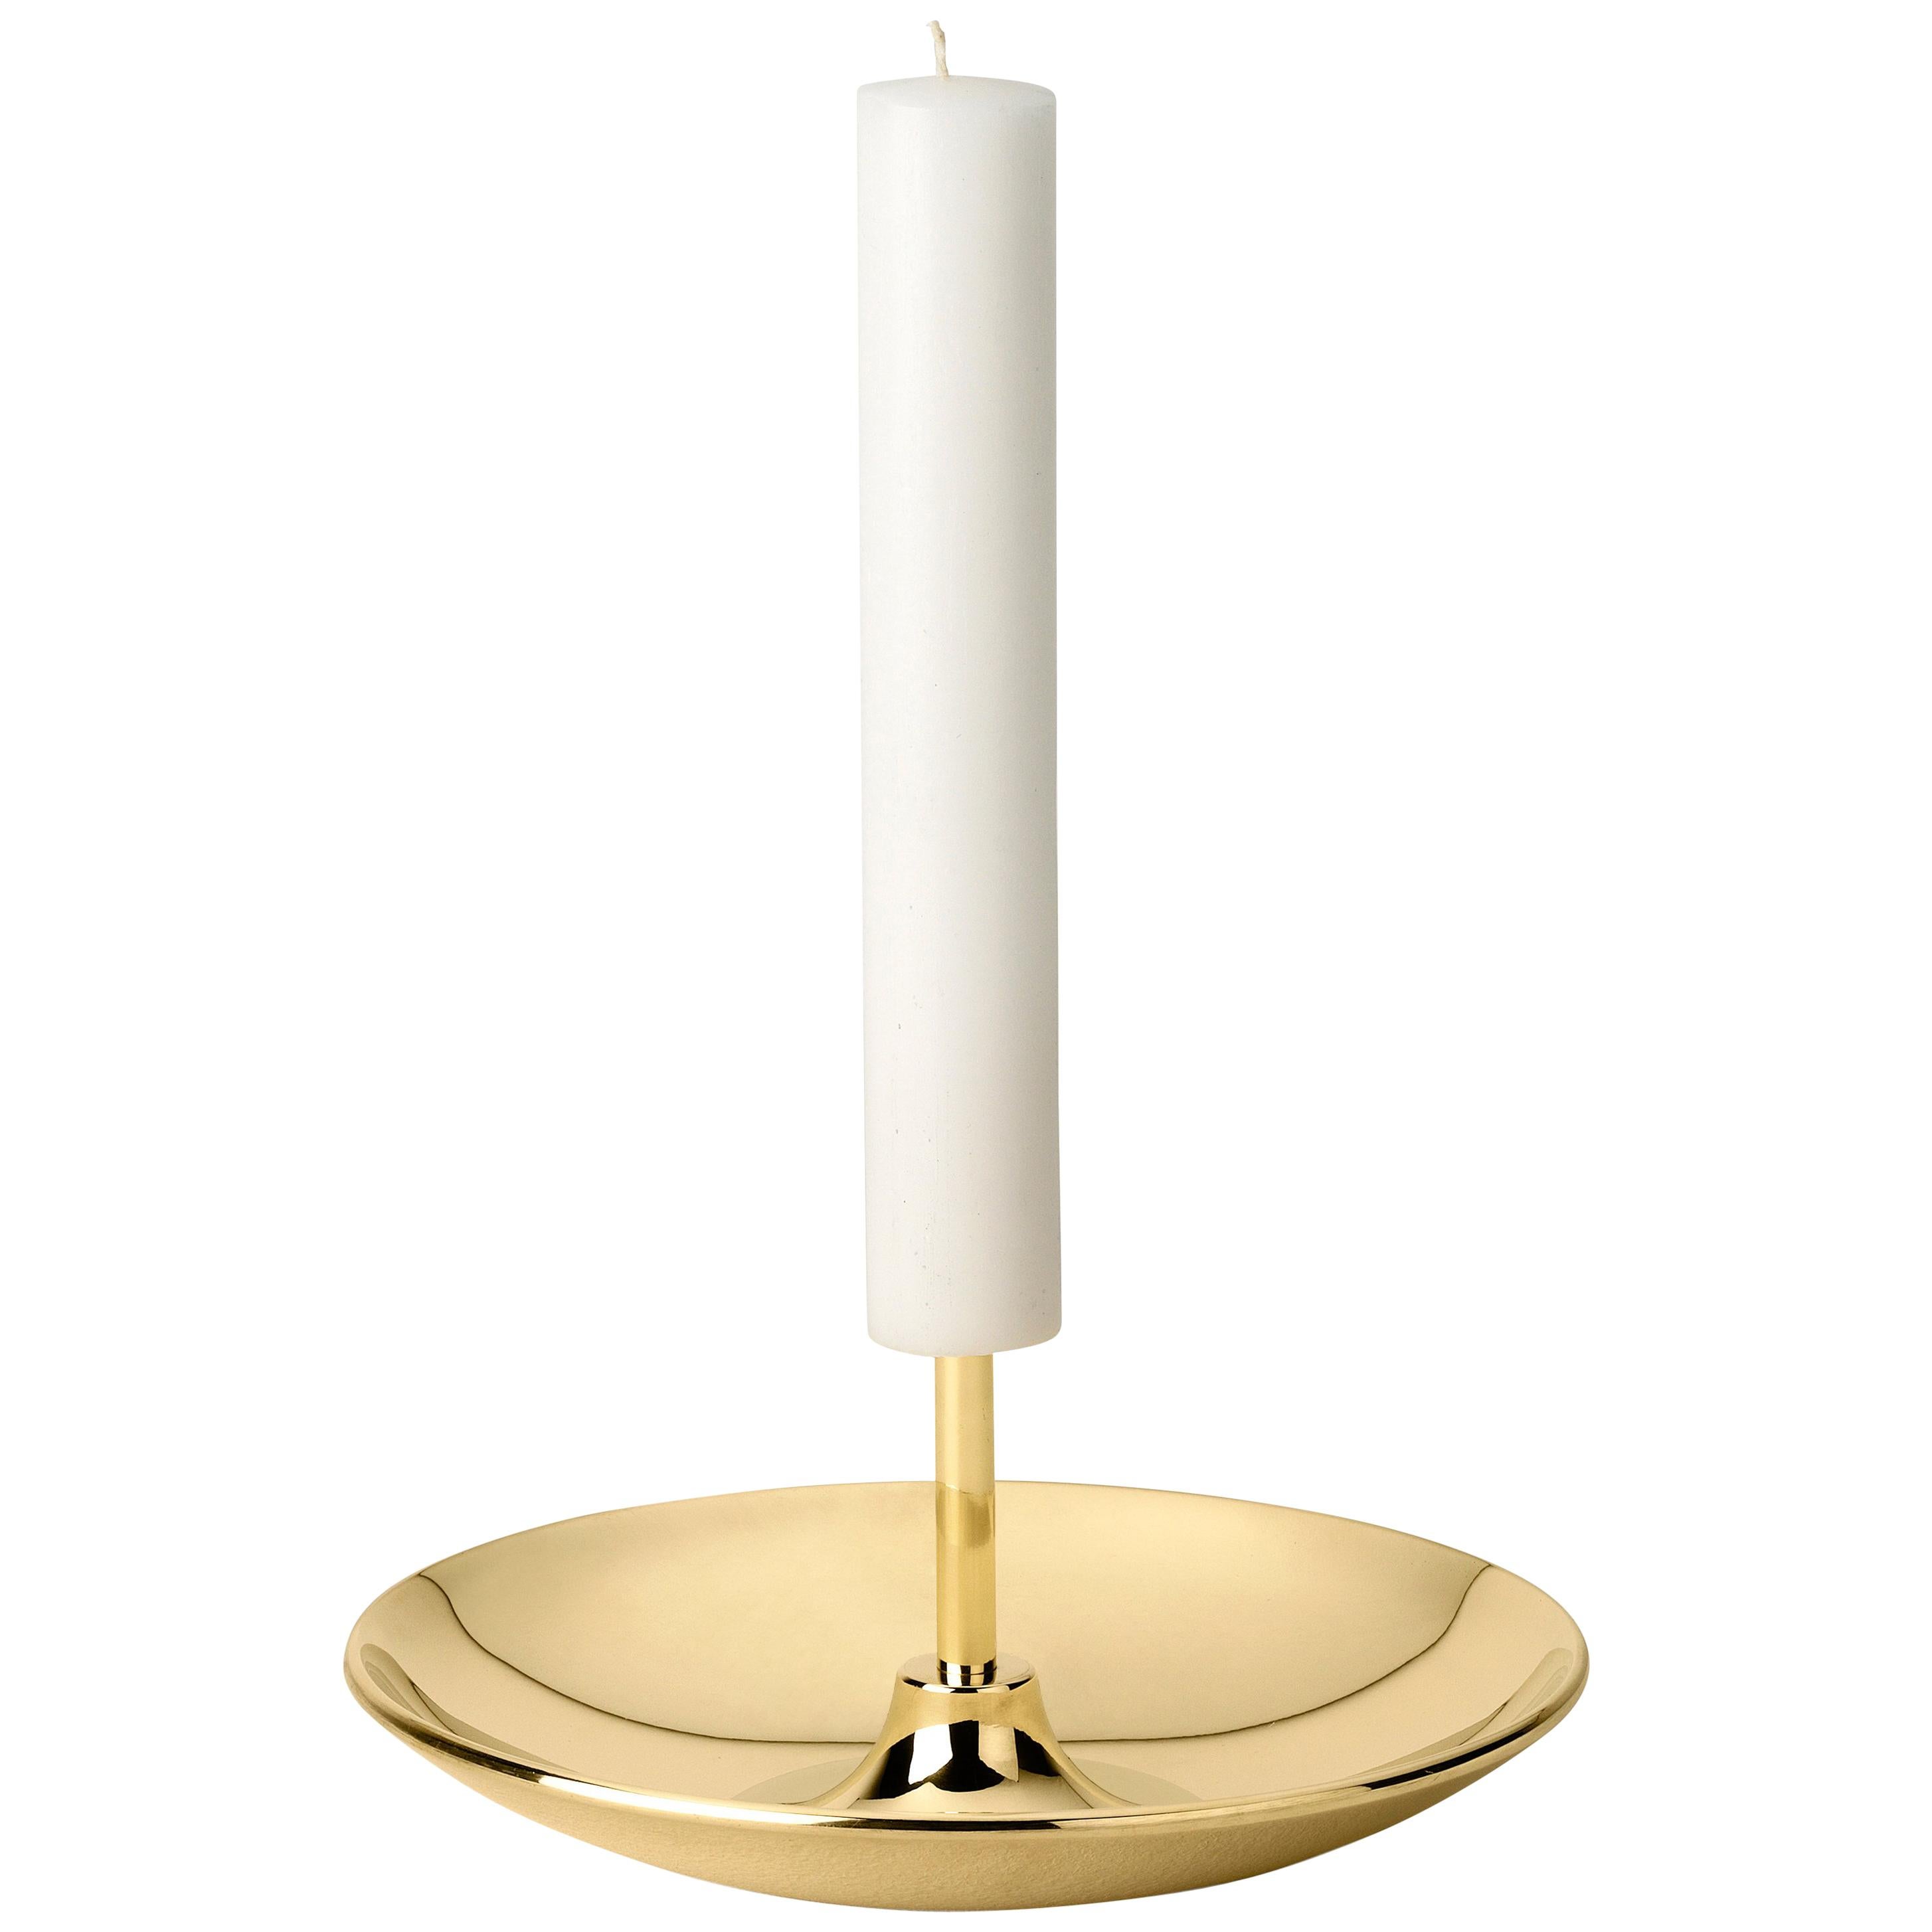 Ghidini 1961 There Push Pin Candleholder in Brass by Studio Job